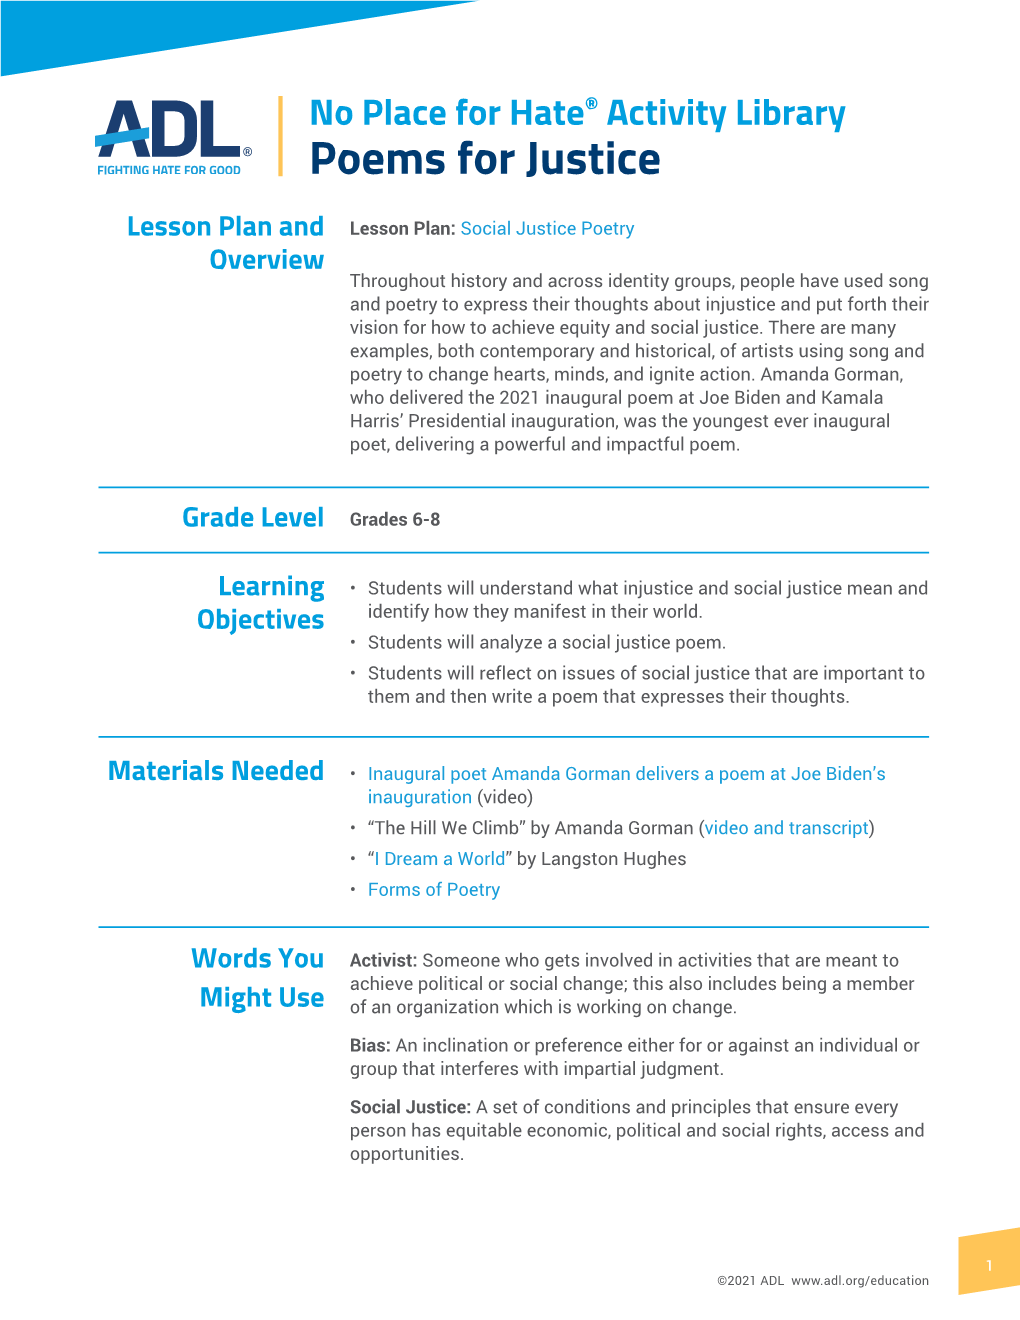 Poems for Justice